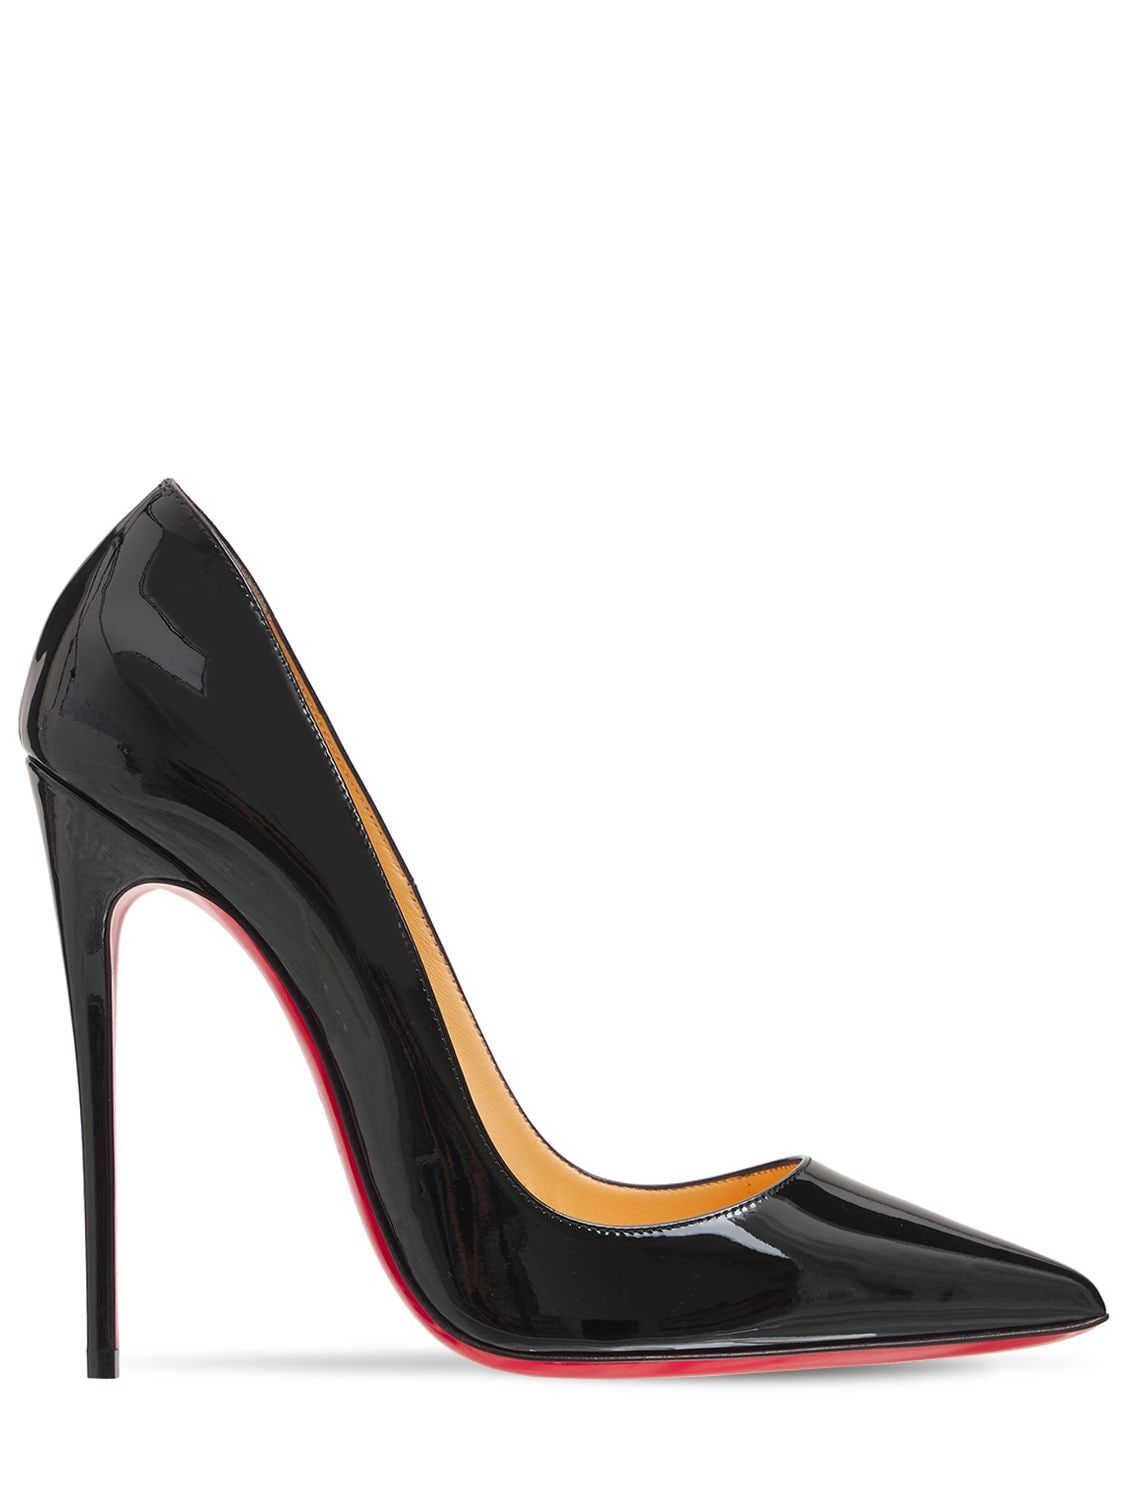 CHRISTIAN LOUBOUTIN 120mm So Kate Patent Leather Pumps